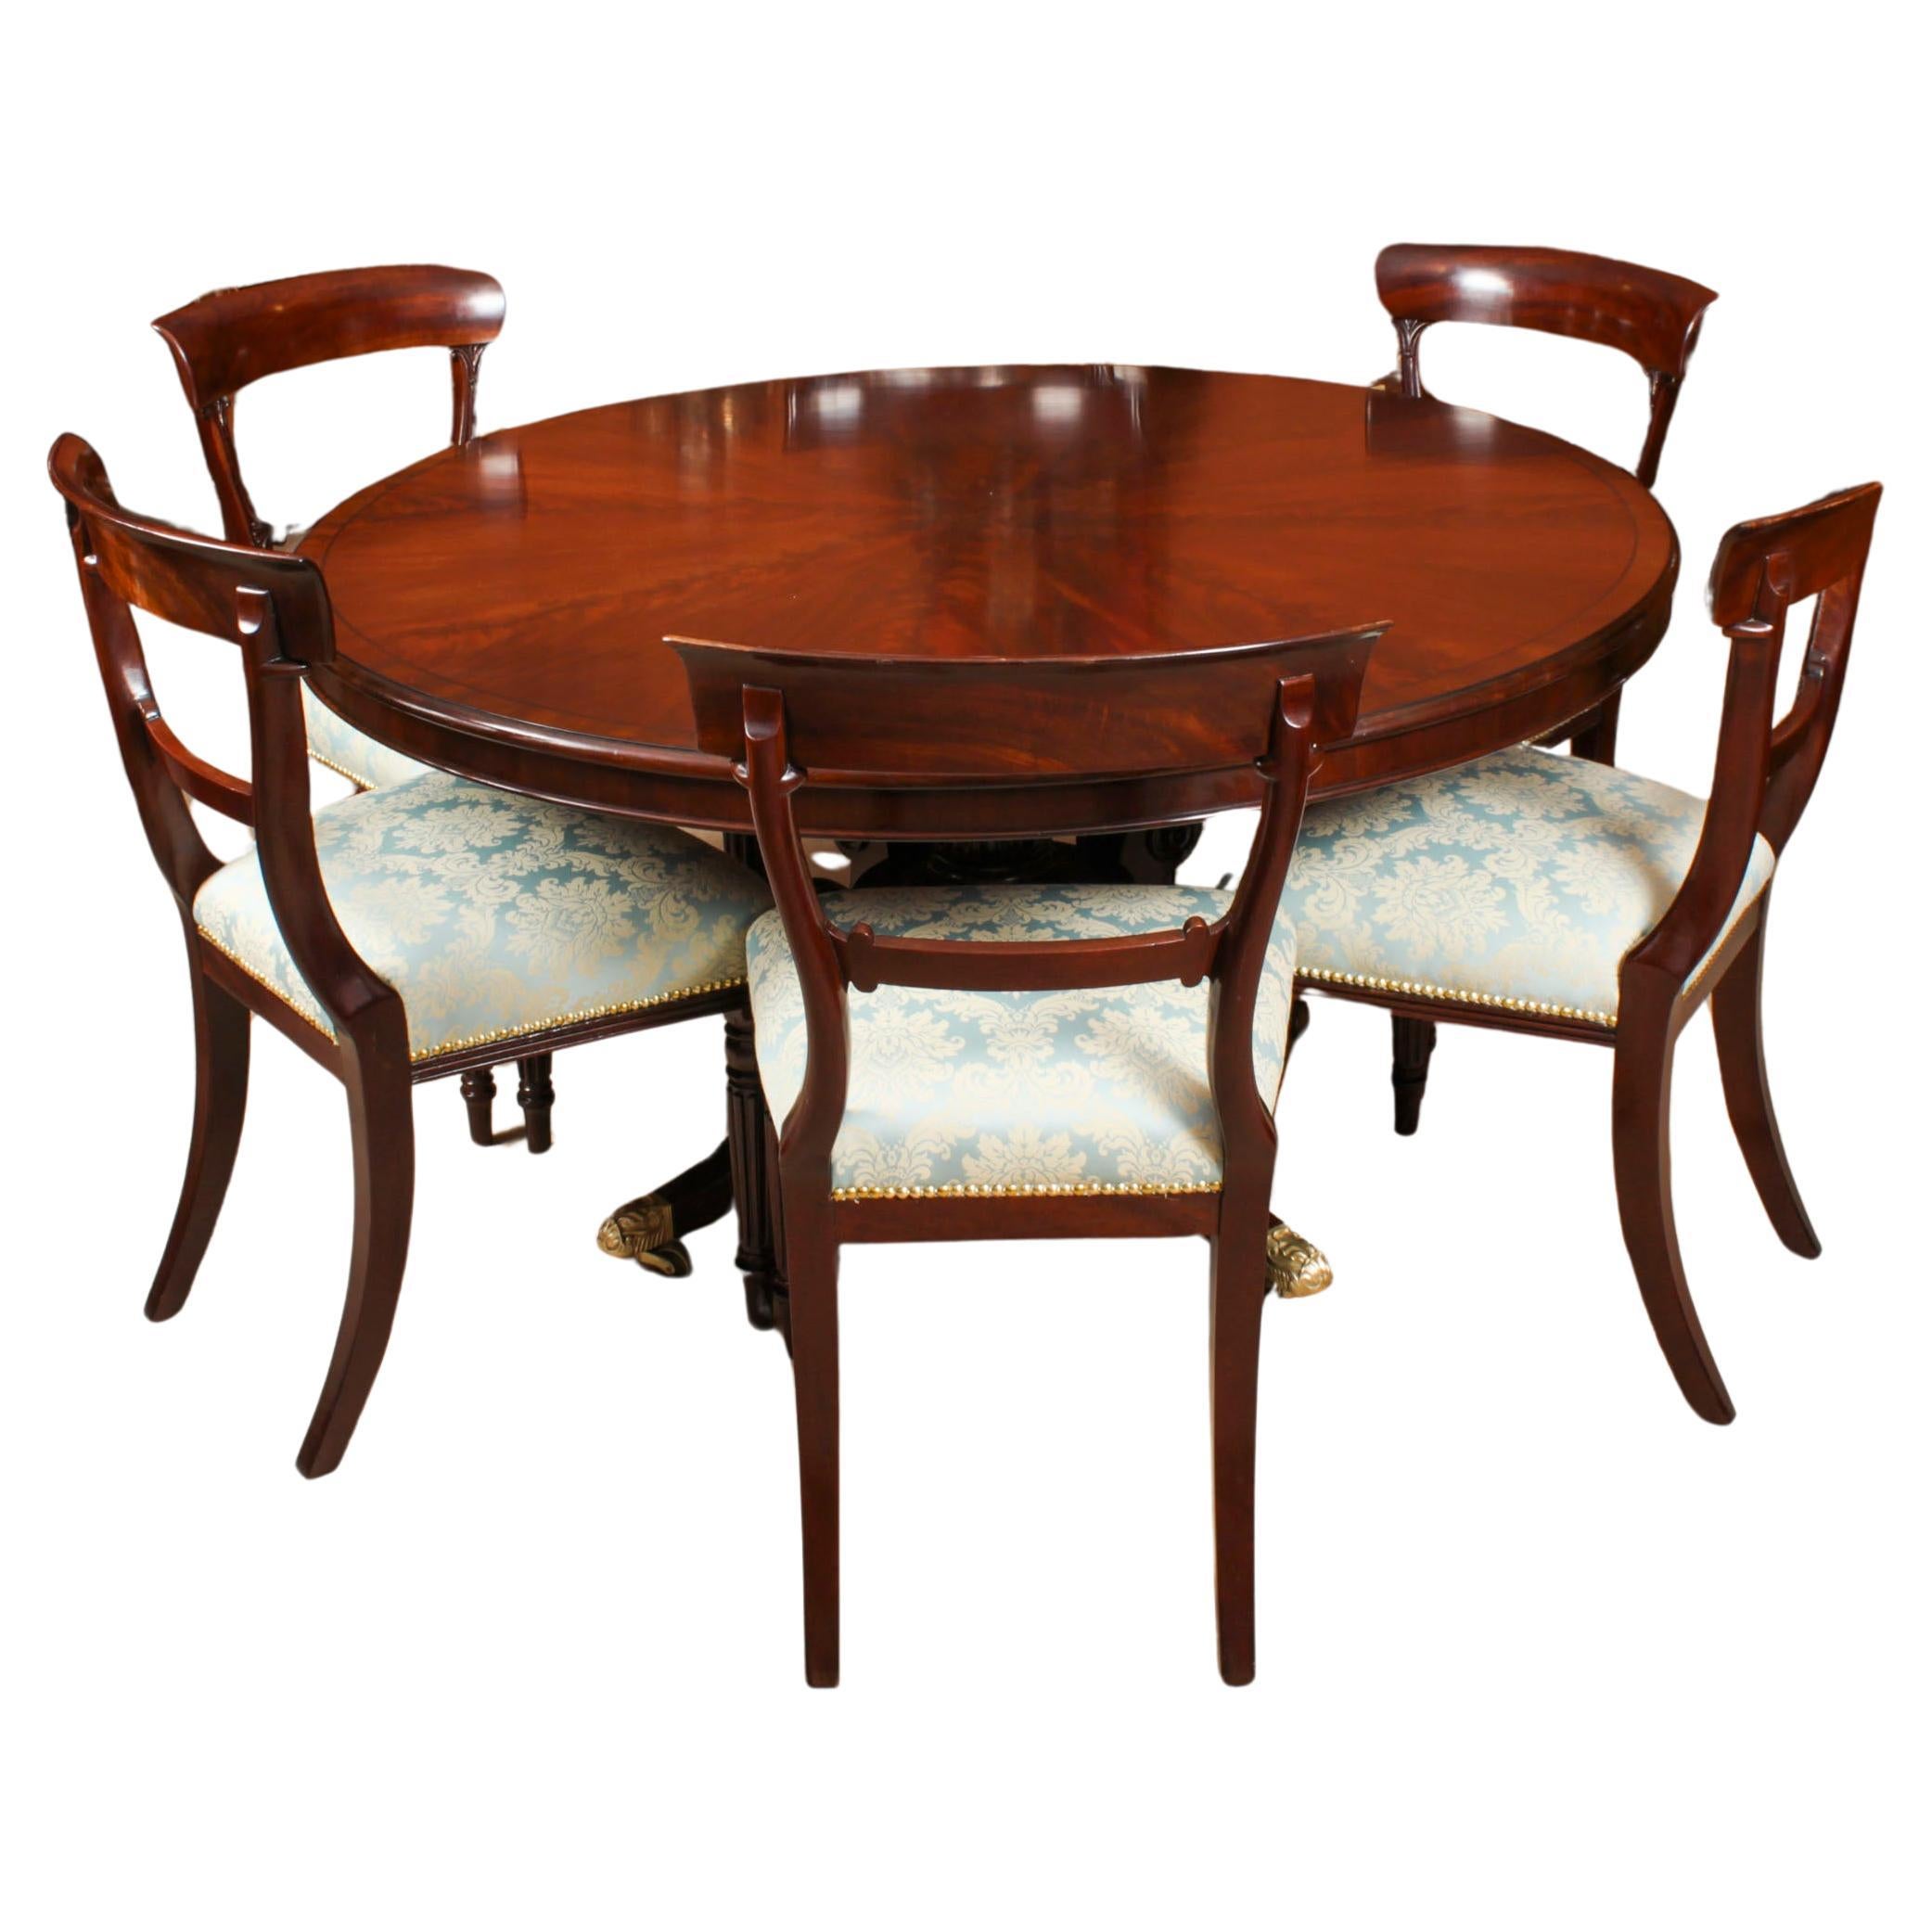 Antique William IV Loo Dining Table & 6 chairs 19th Century